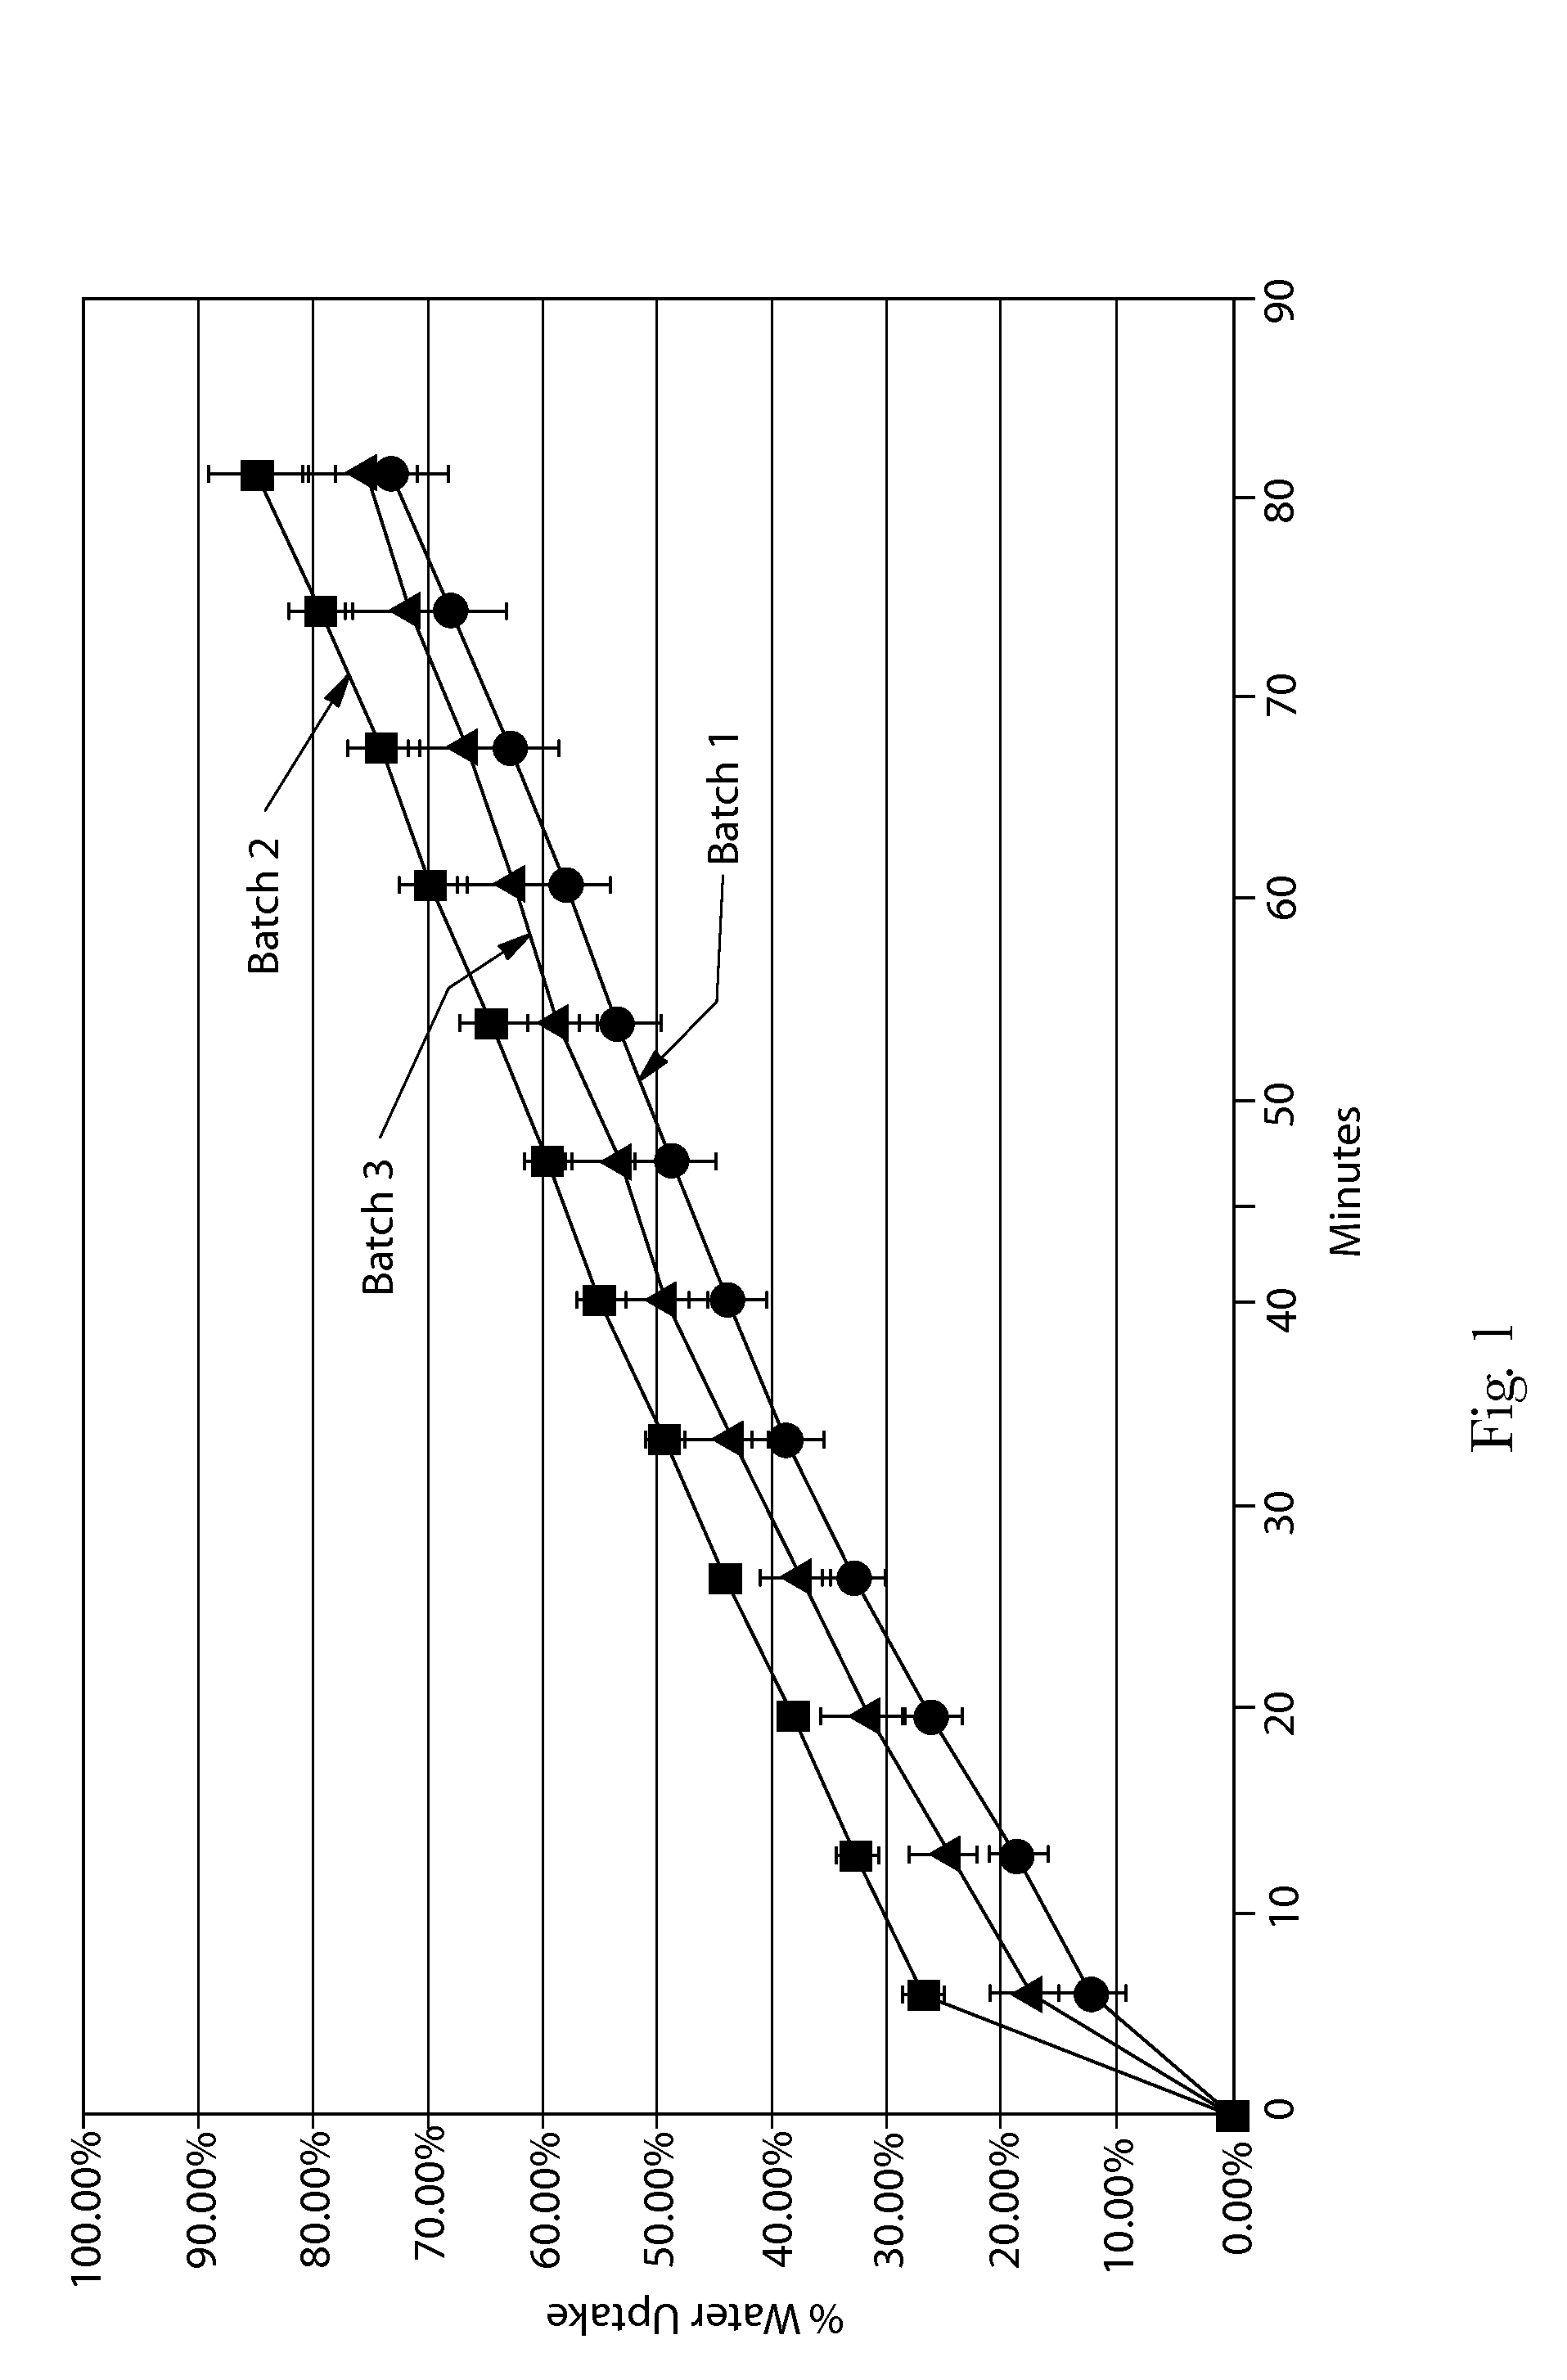 Denture adhesive compositions and methods